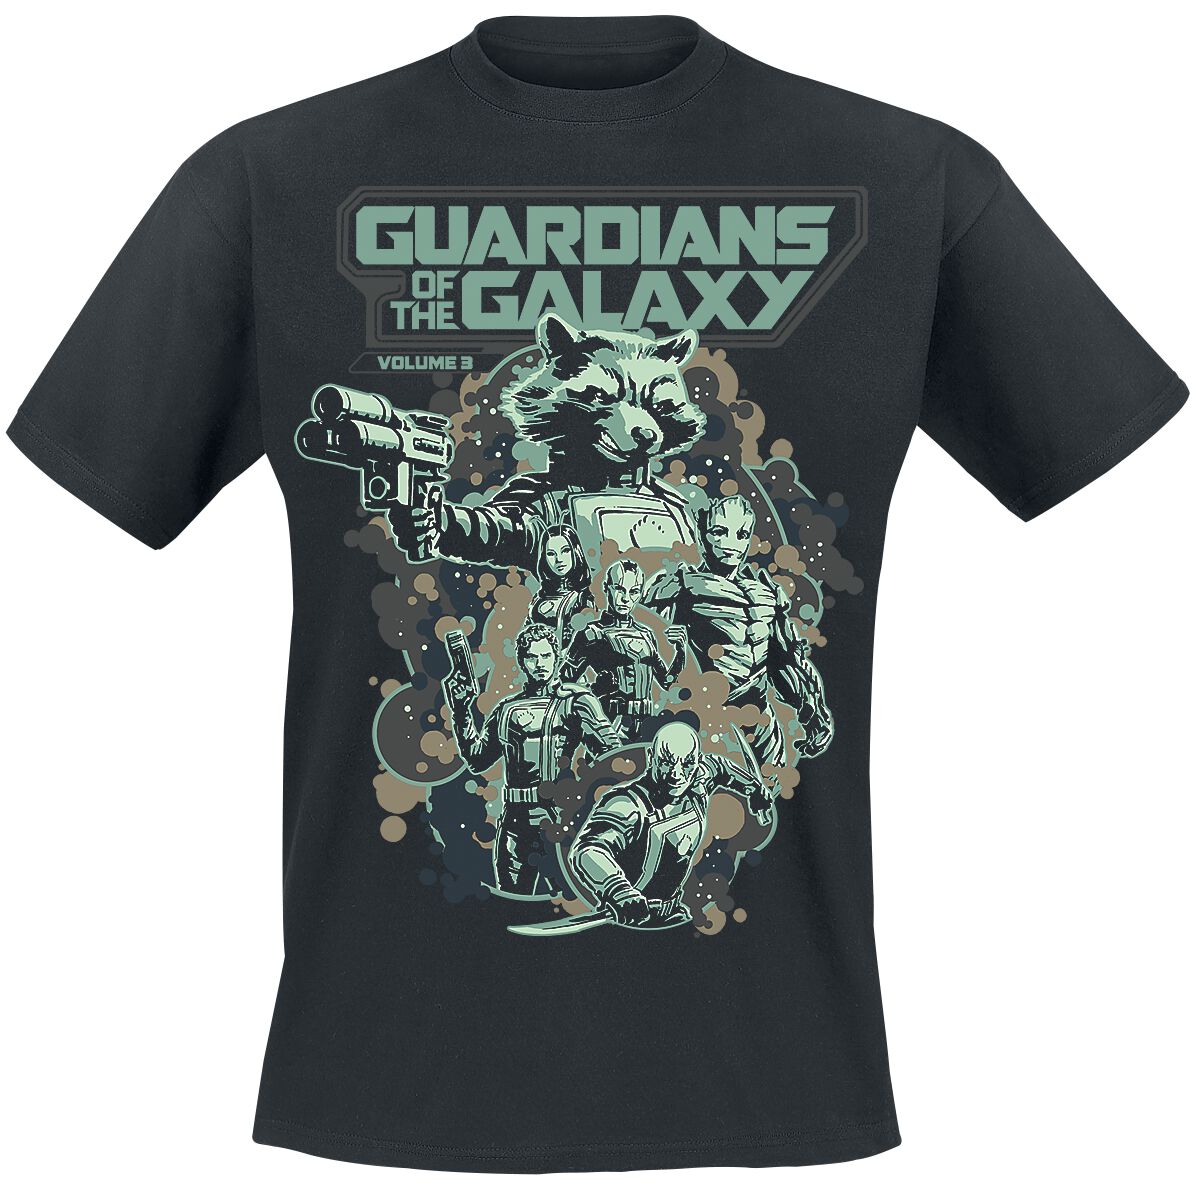 Guardians Of The Galaxy Vol. 3 - Galactic Heroes T-Shirt schwarz in M von Guardians Of The Galaxy